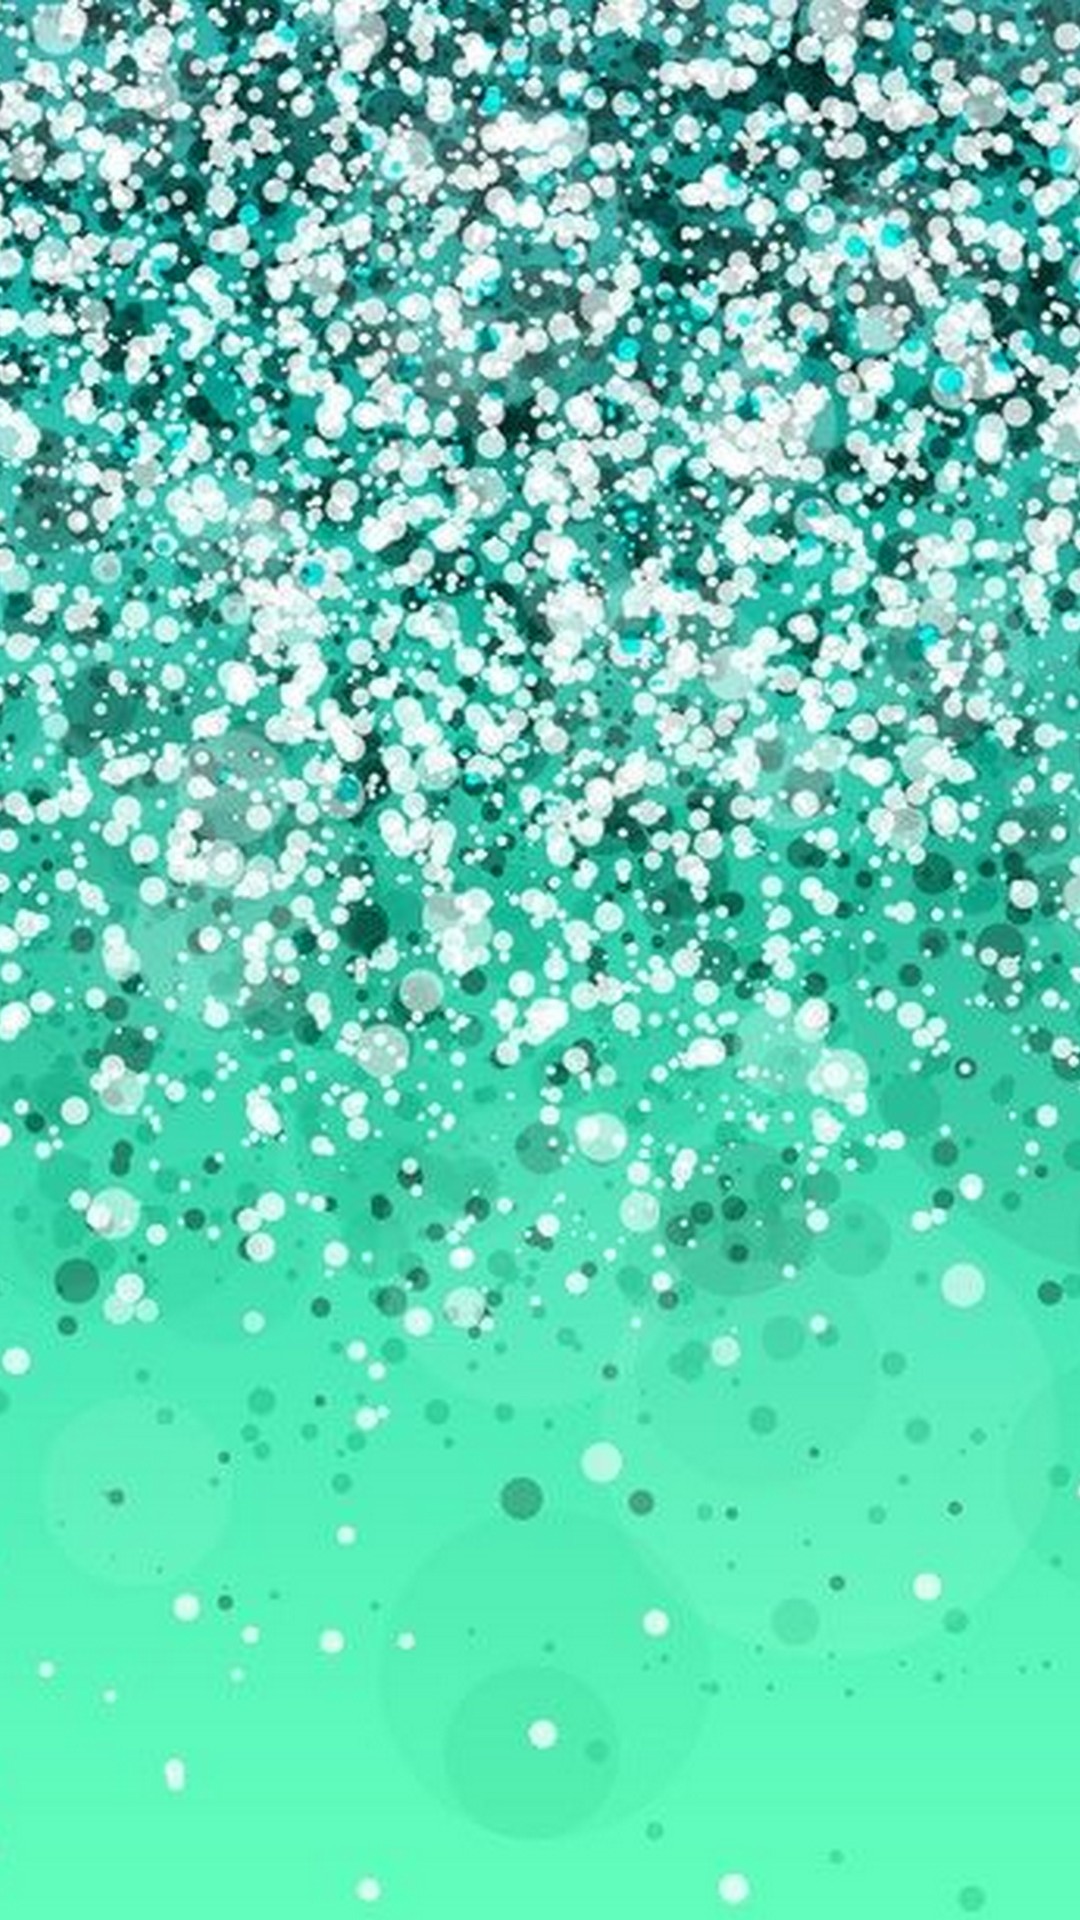 Green Colour Backgrounds For Android with resolution 1080X1920 pixel. You can make this wallpaper for your Android backgrounds, Tablet, Smartphones Screensavers and Mobile Phone Lock Screen